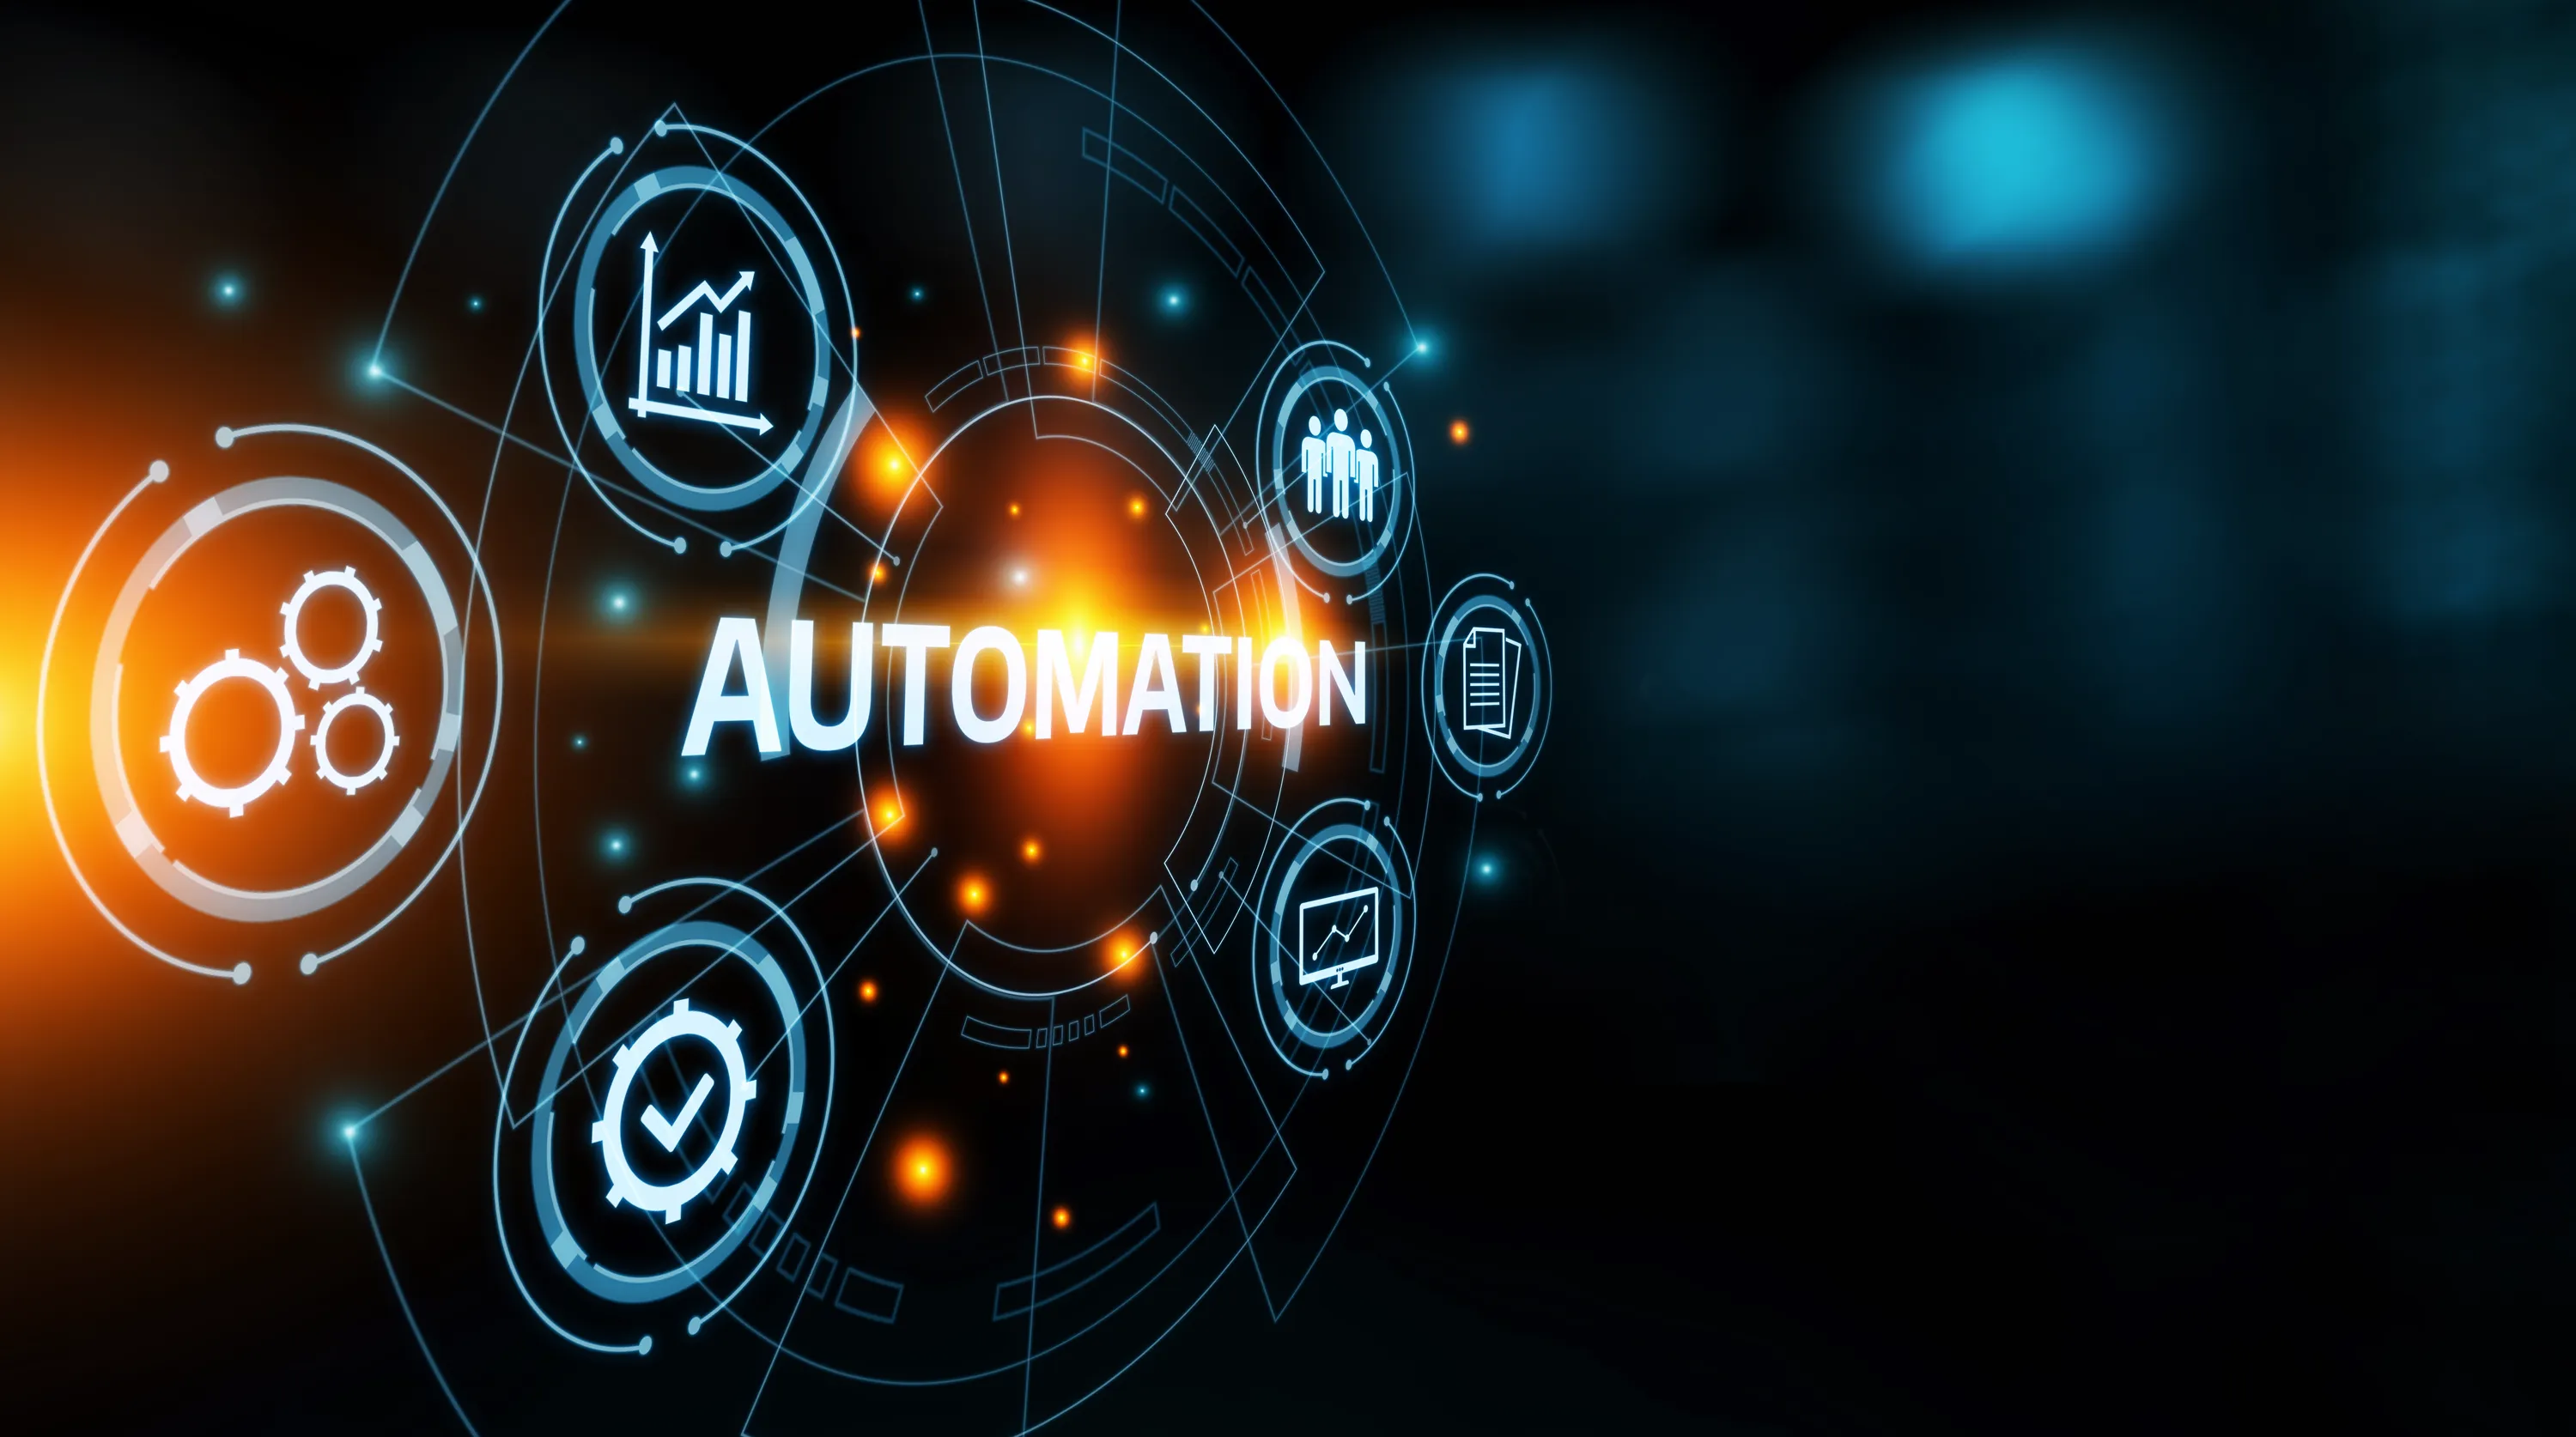 What is Security Automation?